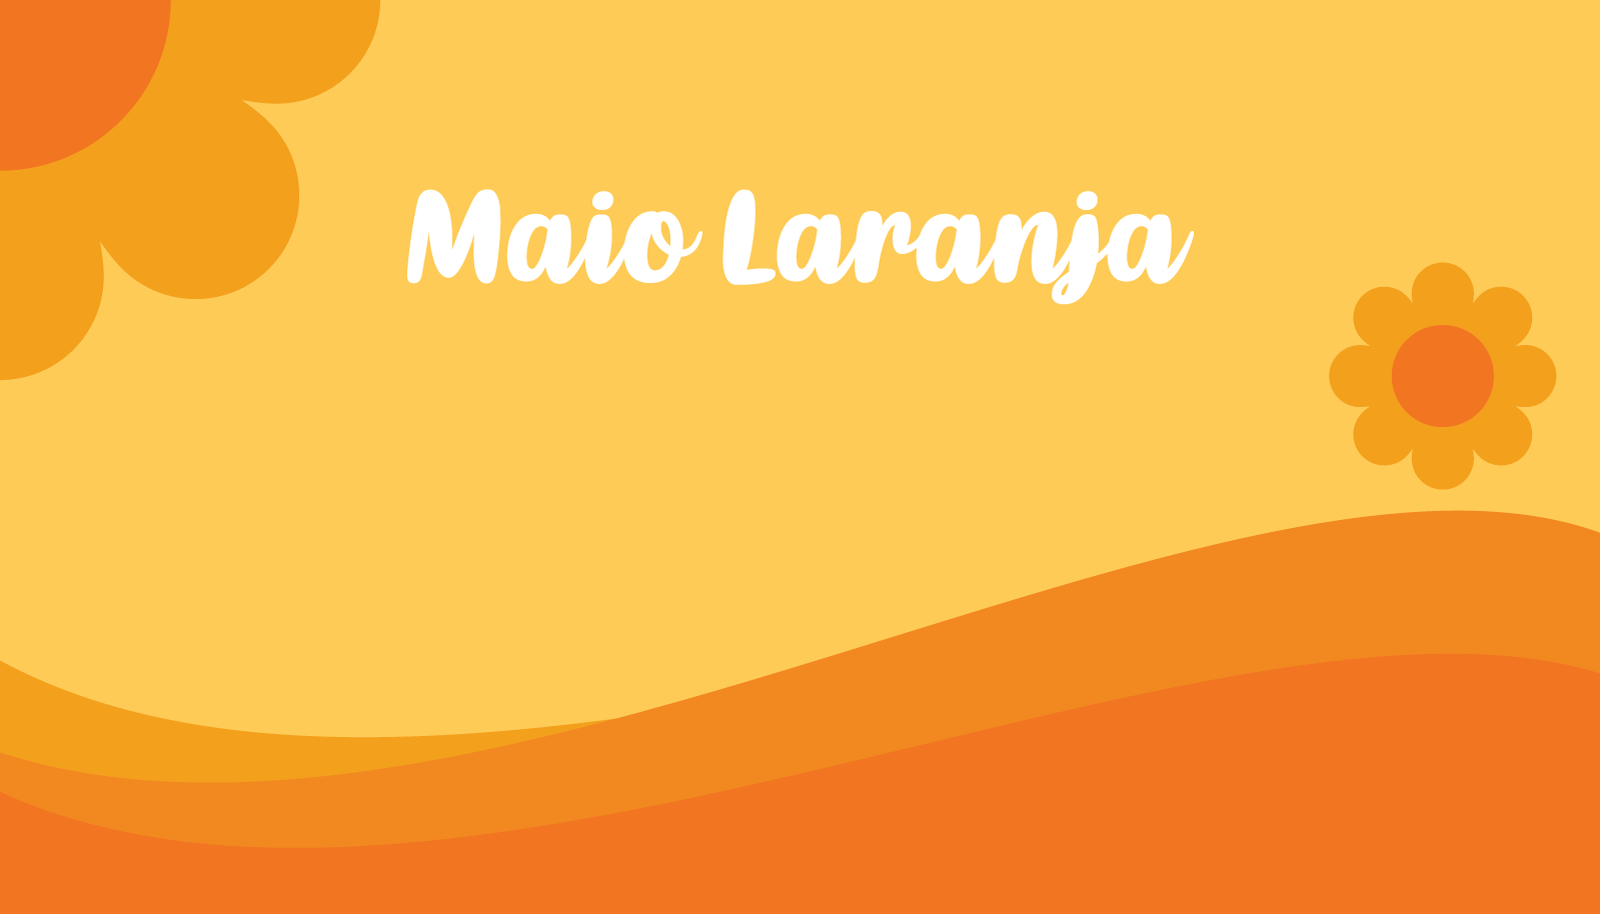 Maio Laranja background campaign against violence research of children 18 ma